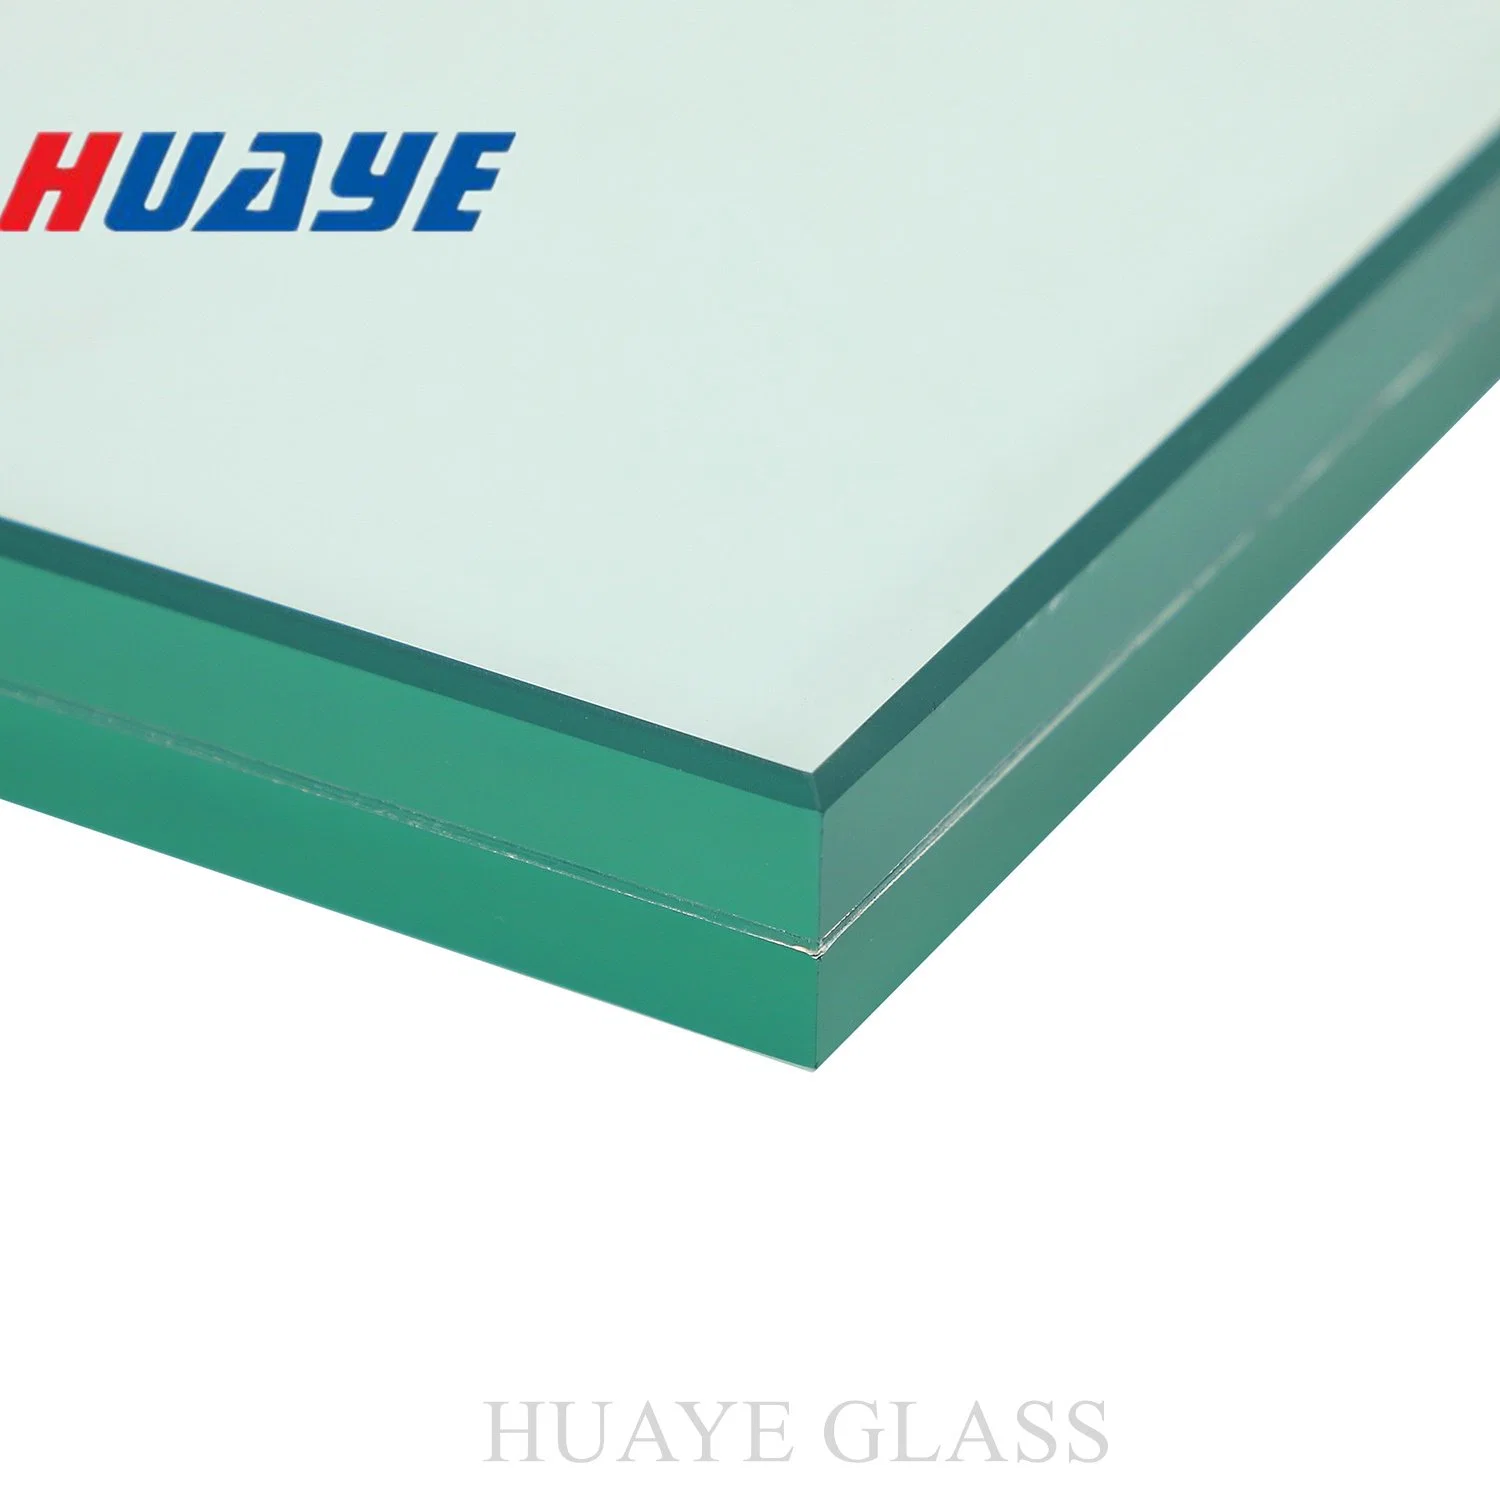 5mm/6mm/8mm/10mm/12mm Tempered/Toughened/Clear/Frost/Laminated Glass for Shower Door/Balcony/Railing/Balustrade